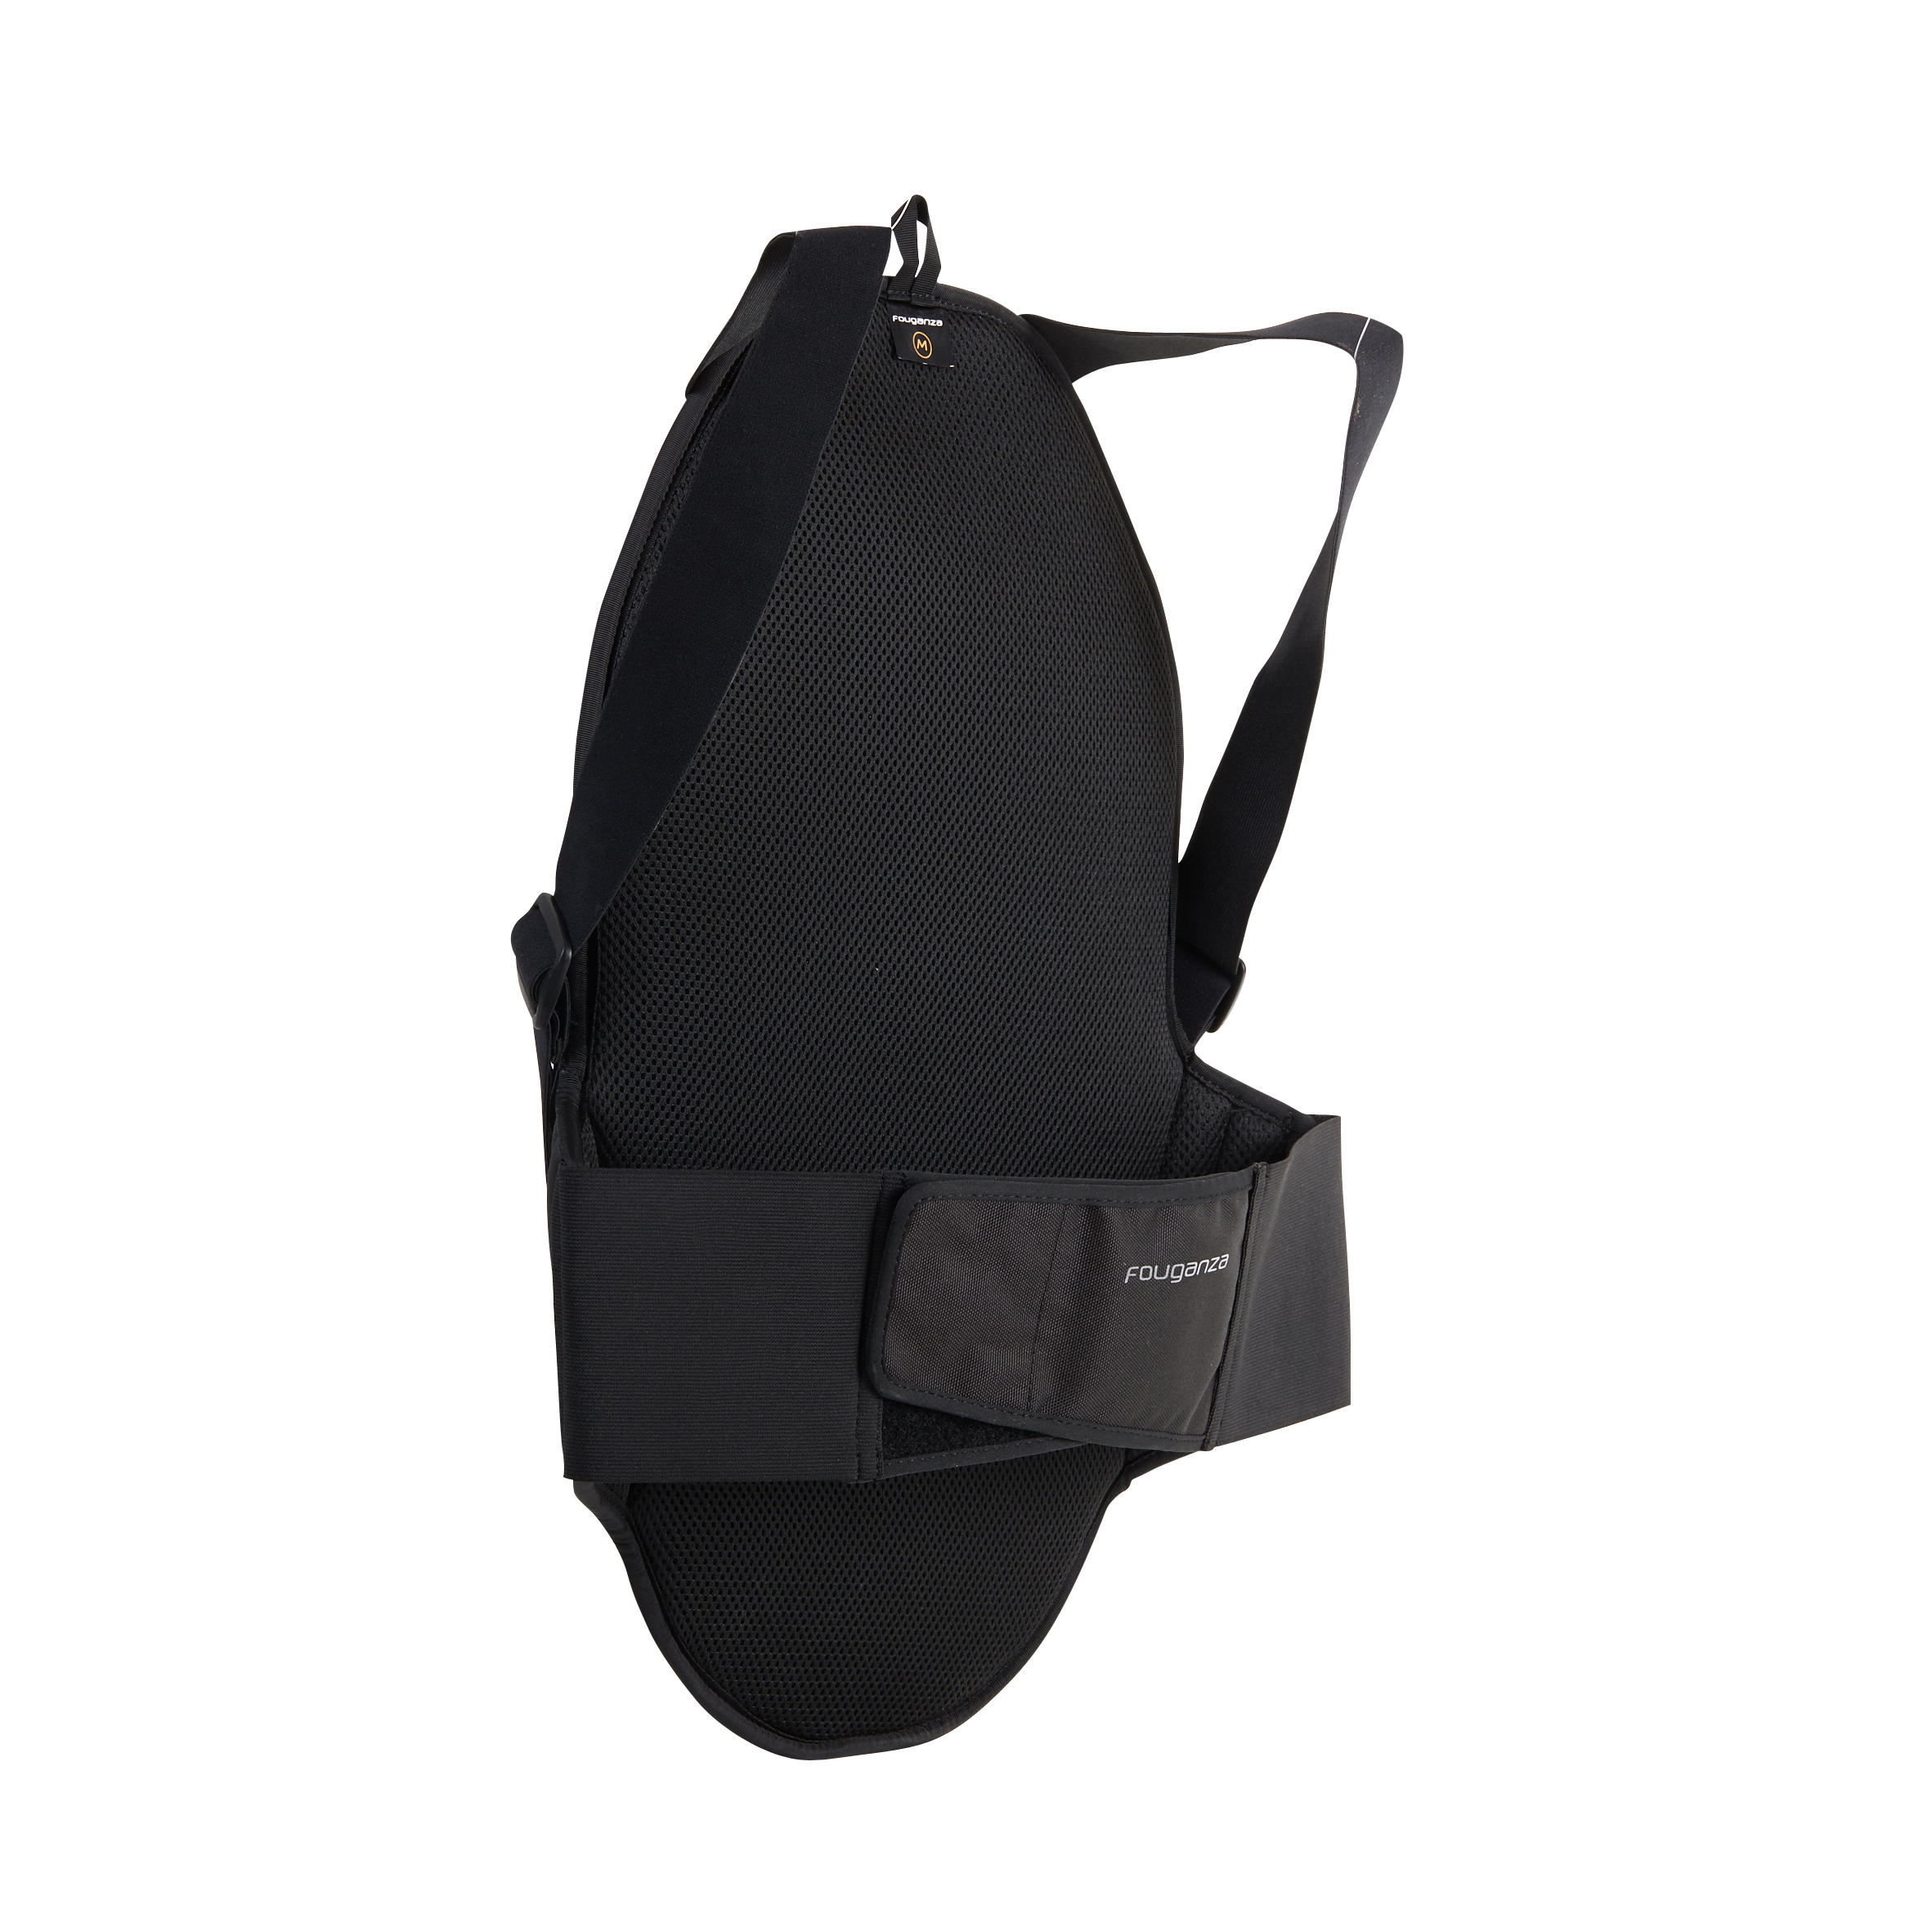 Safety Adult Horse Riding Back Protector - Black 5/5